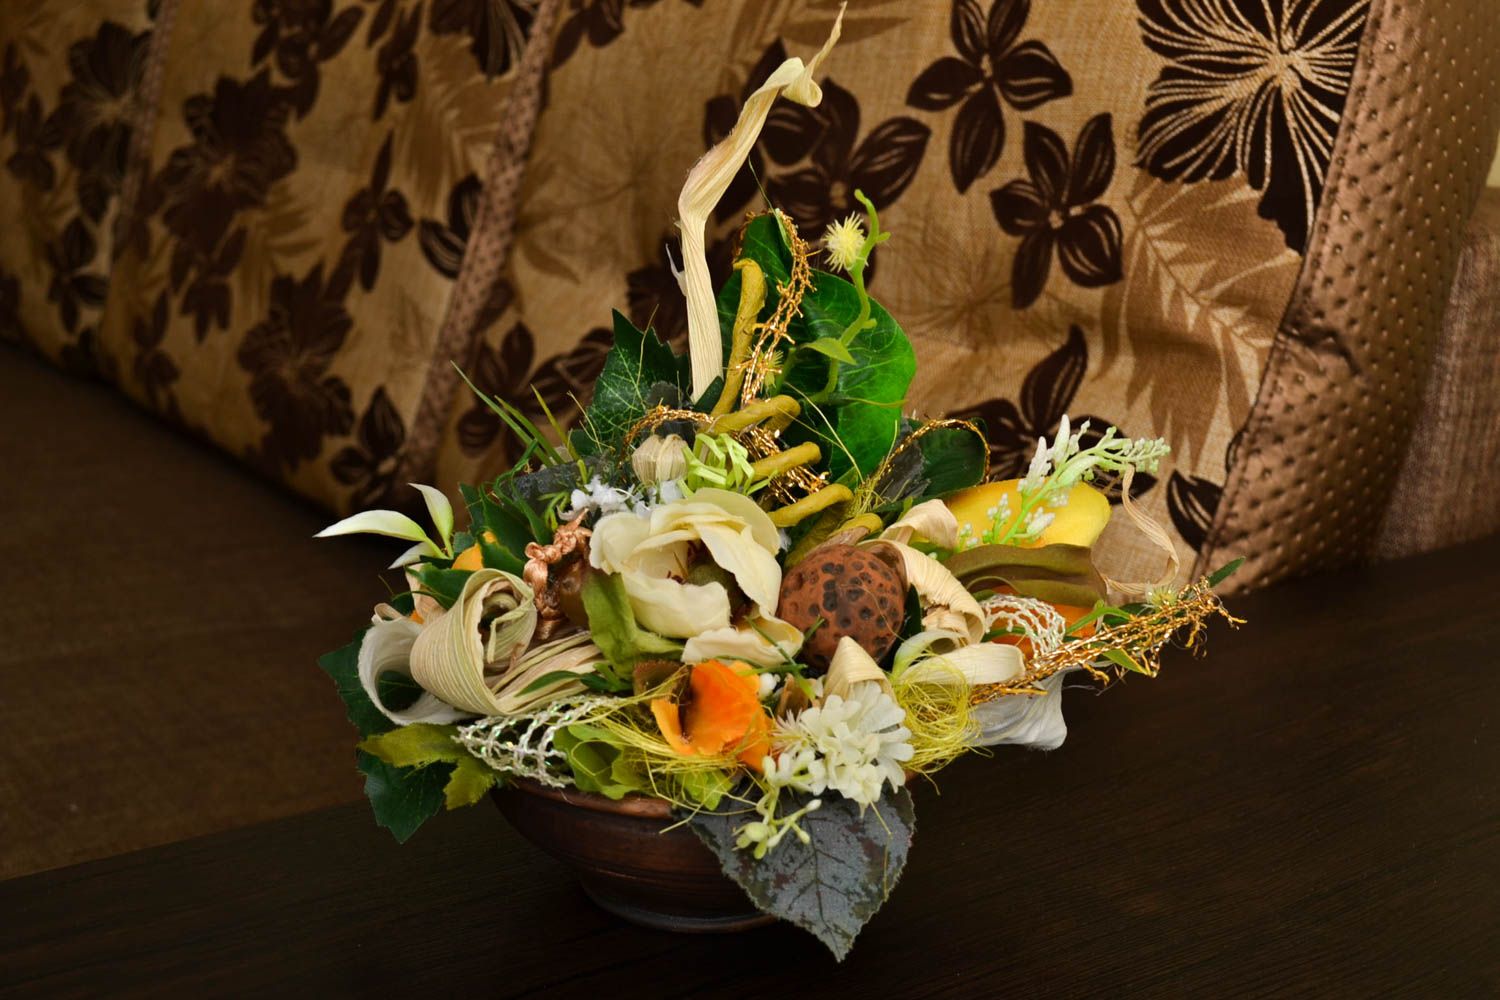 Handmade bouquet with artificial flowers table decor ideas unusual gift photo 1